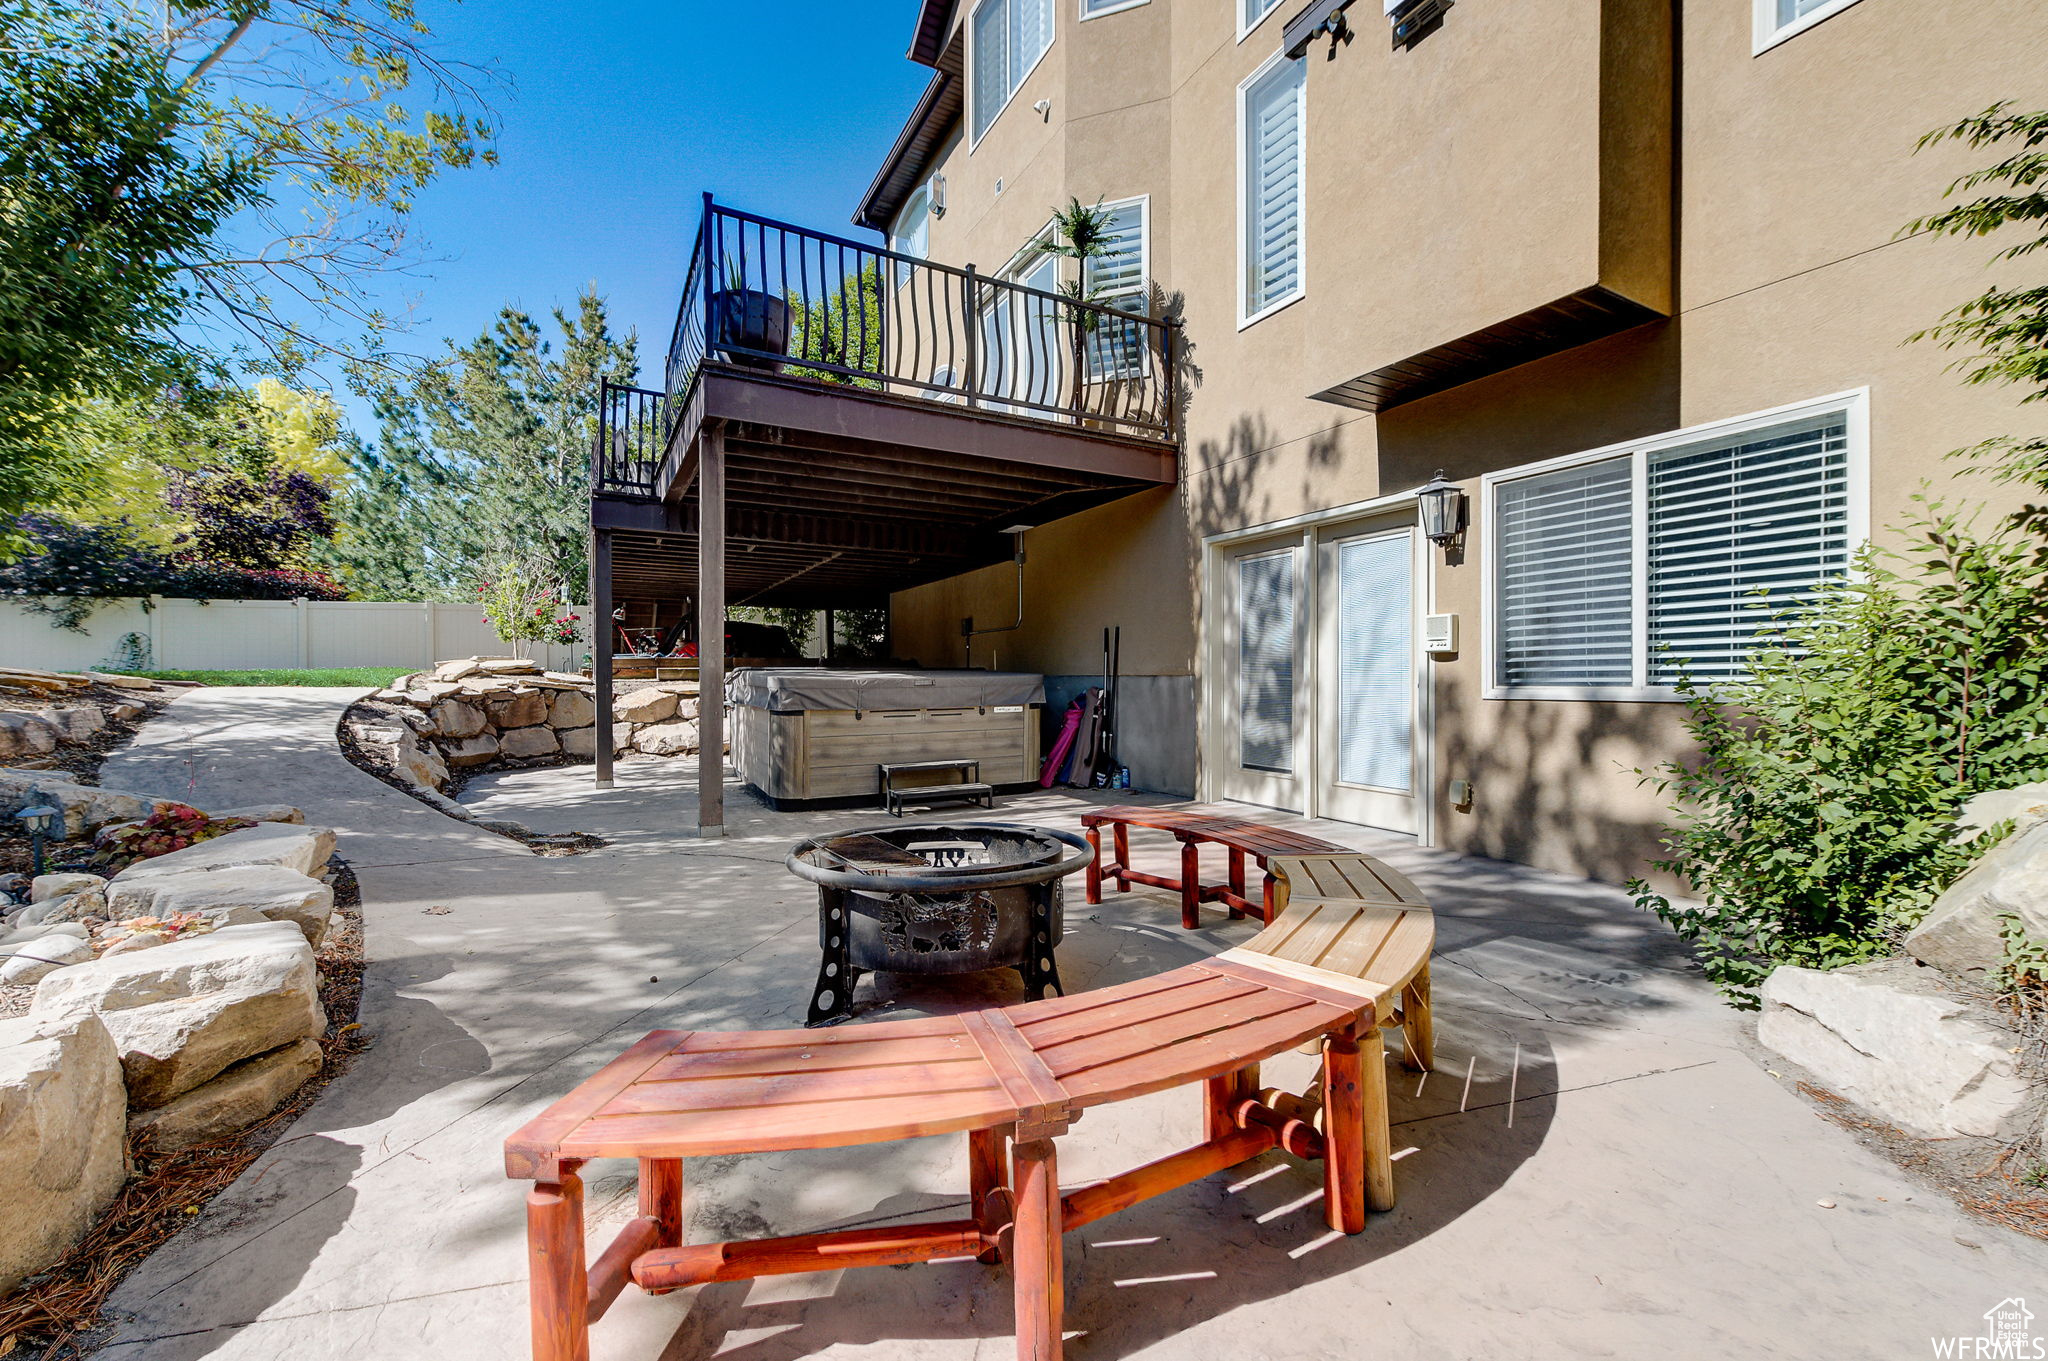 View of terrace with a hot tub, a wooden deck, and a fire pit